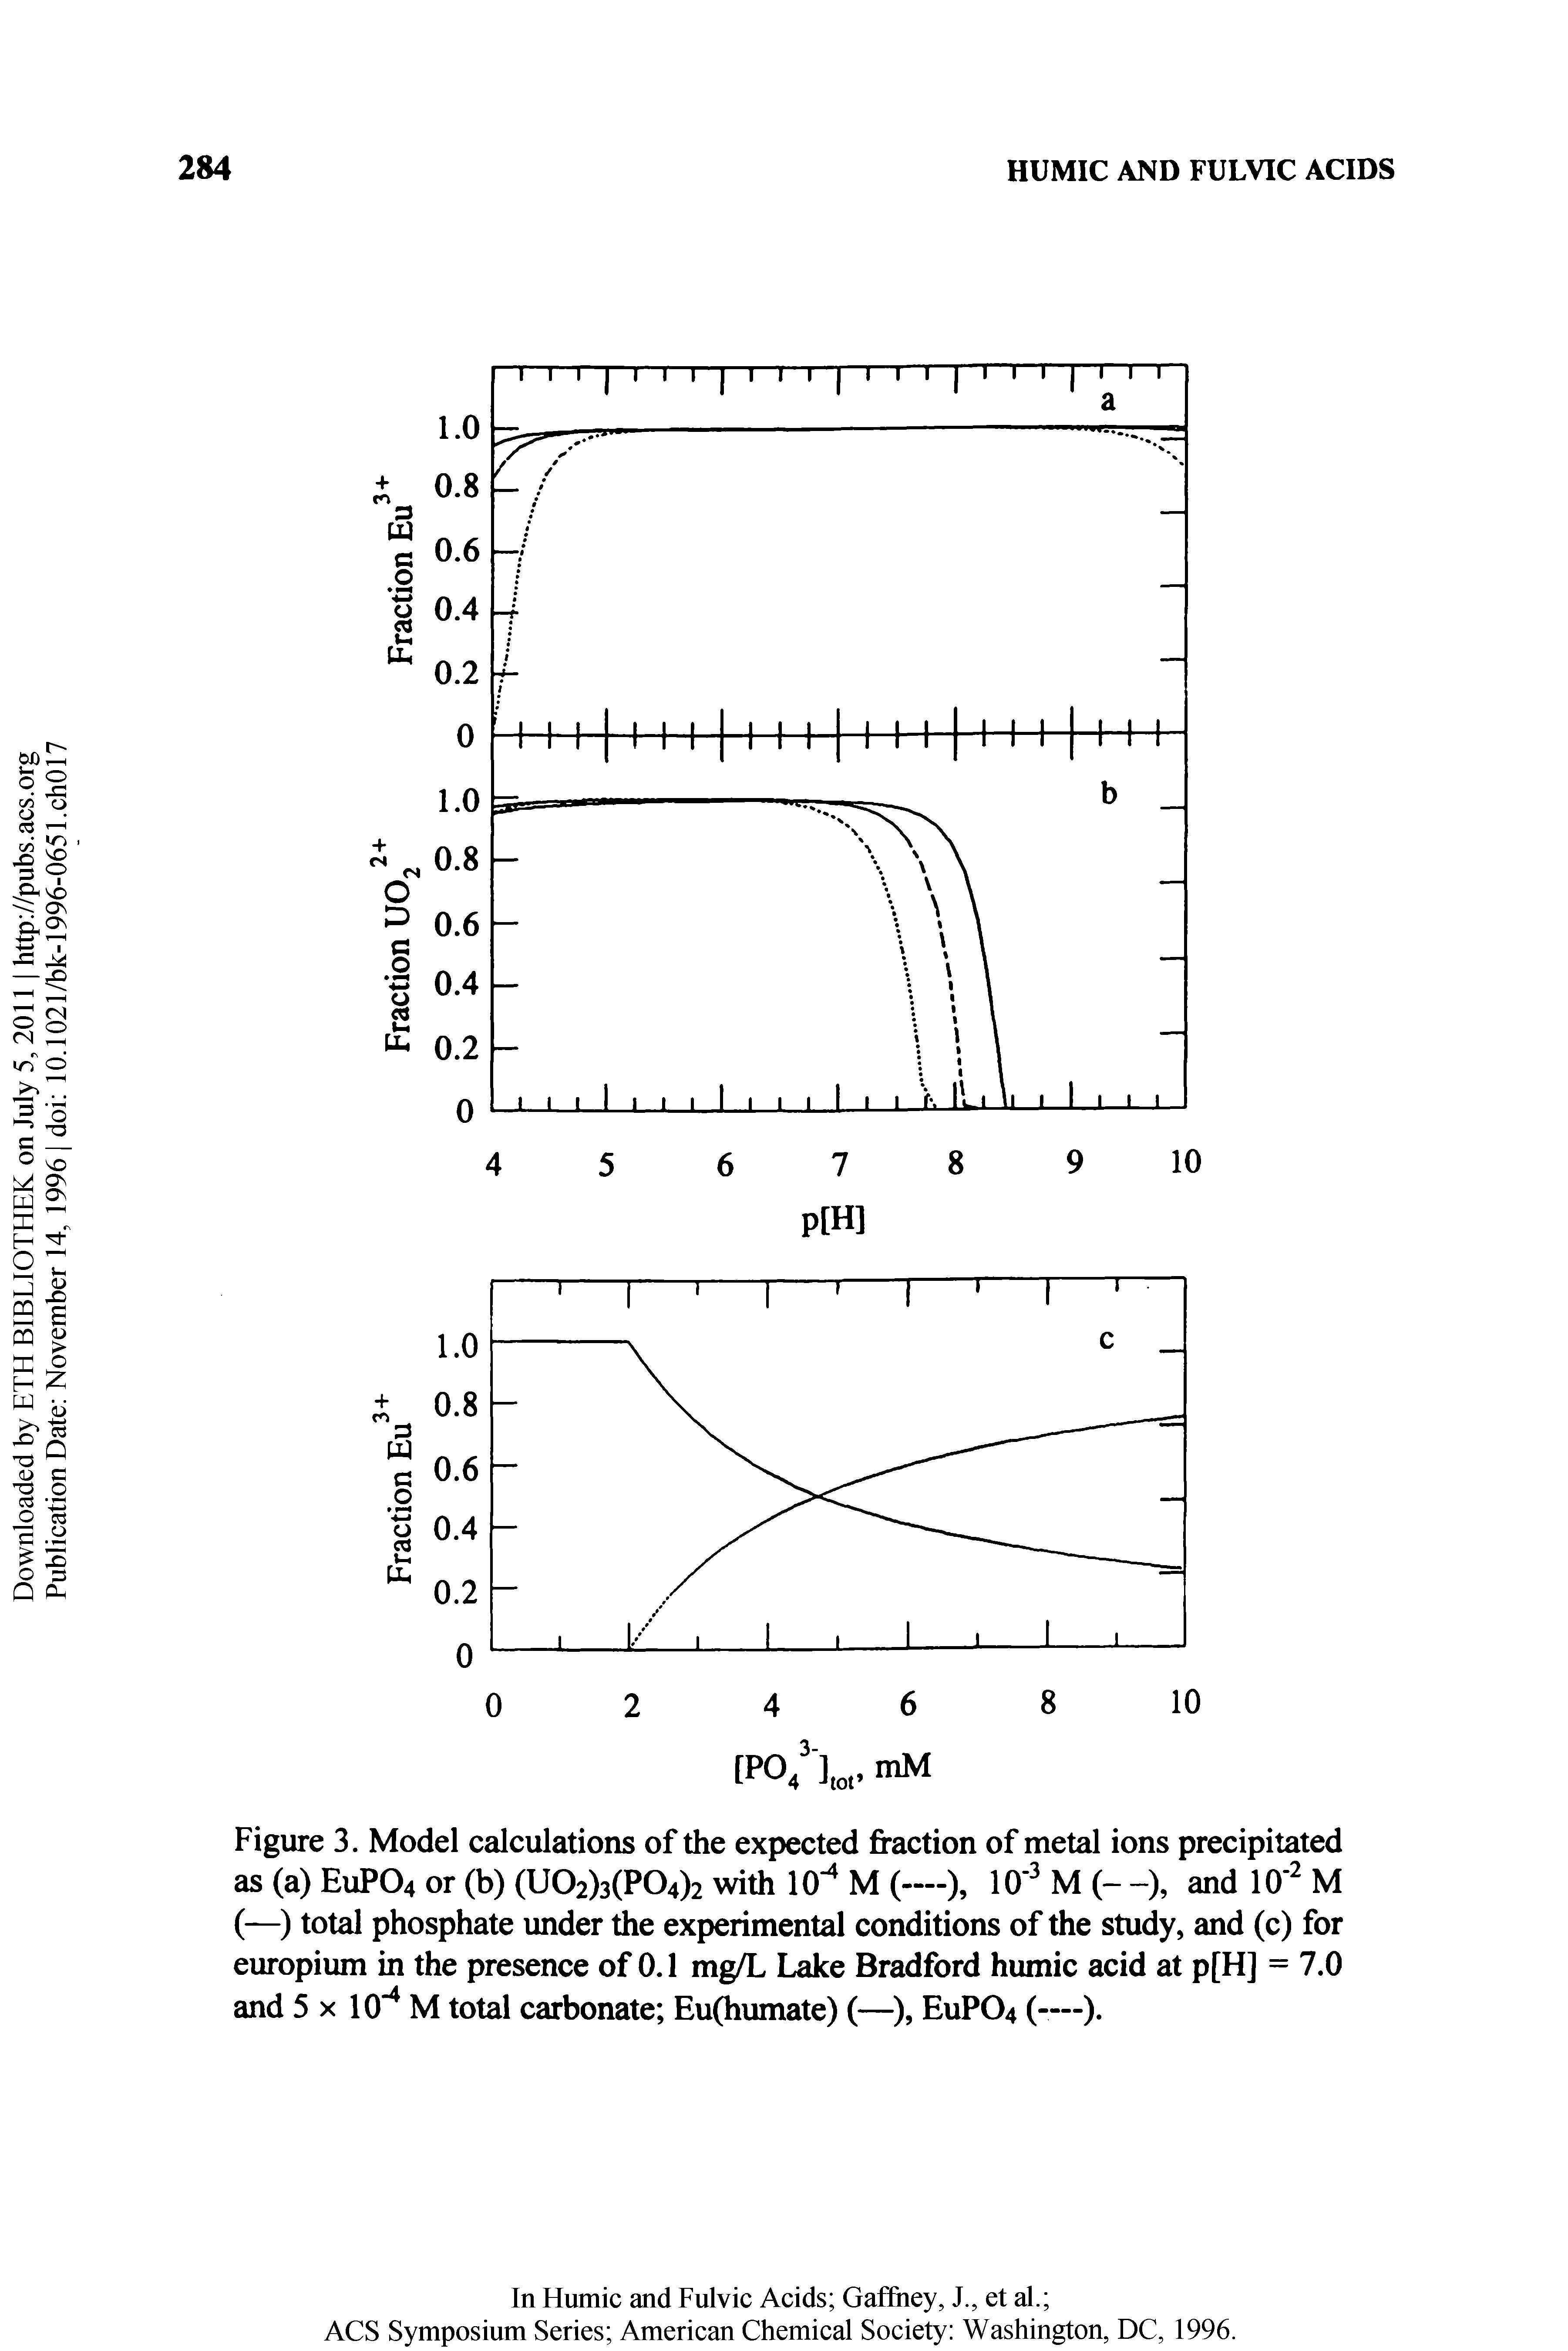 Figure 3. Model calculations of the expected fraction of metal ions precipitated as (a) EUPO4 or (b) (U02)3(P04)2 with 10" M (—), 10 M (- -), and 10 M (—) total phosphate under the experimental conditions of the study, and (c) for europium in the presence of 0.1 mg/L Lake Bradford humic acid at p[H] = 7.0 and 5 X 10" M total carbonate Eu(humate) (—), EUPO4 (-—).